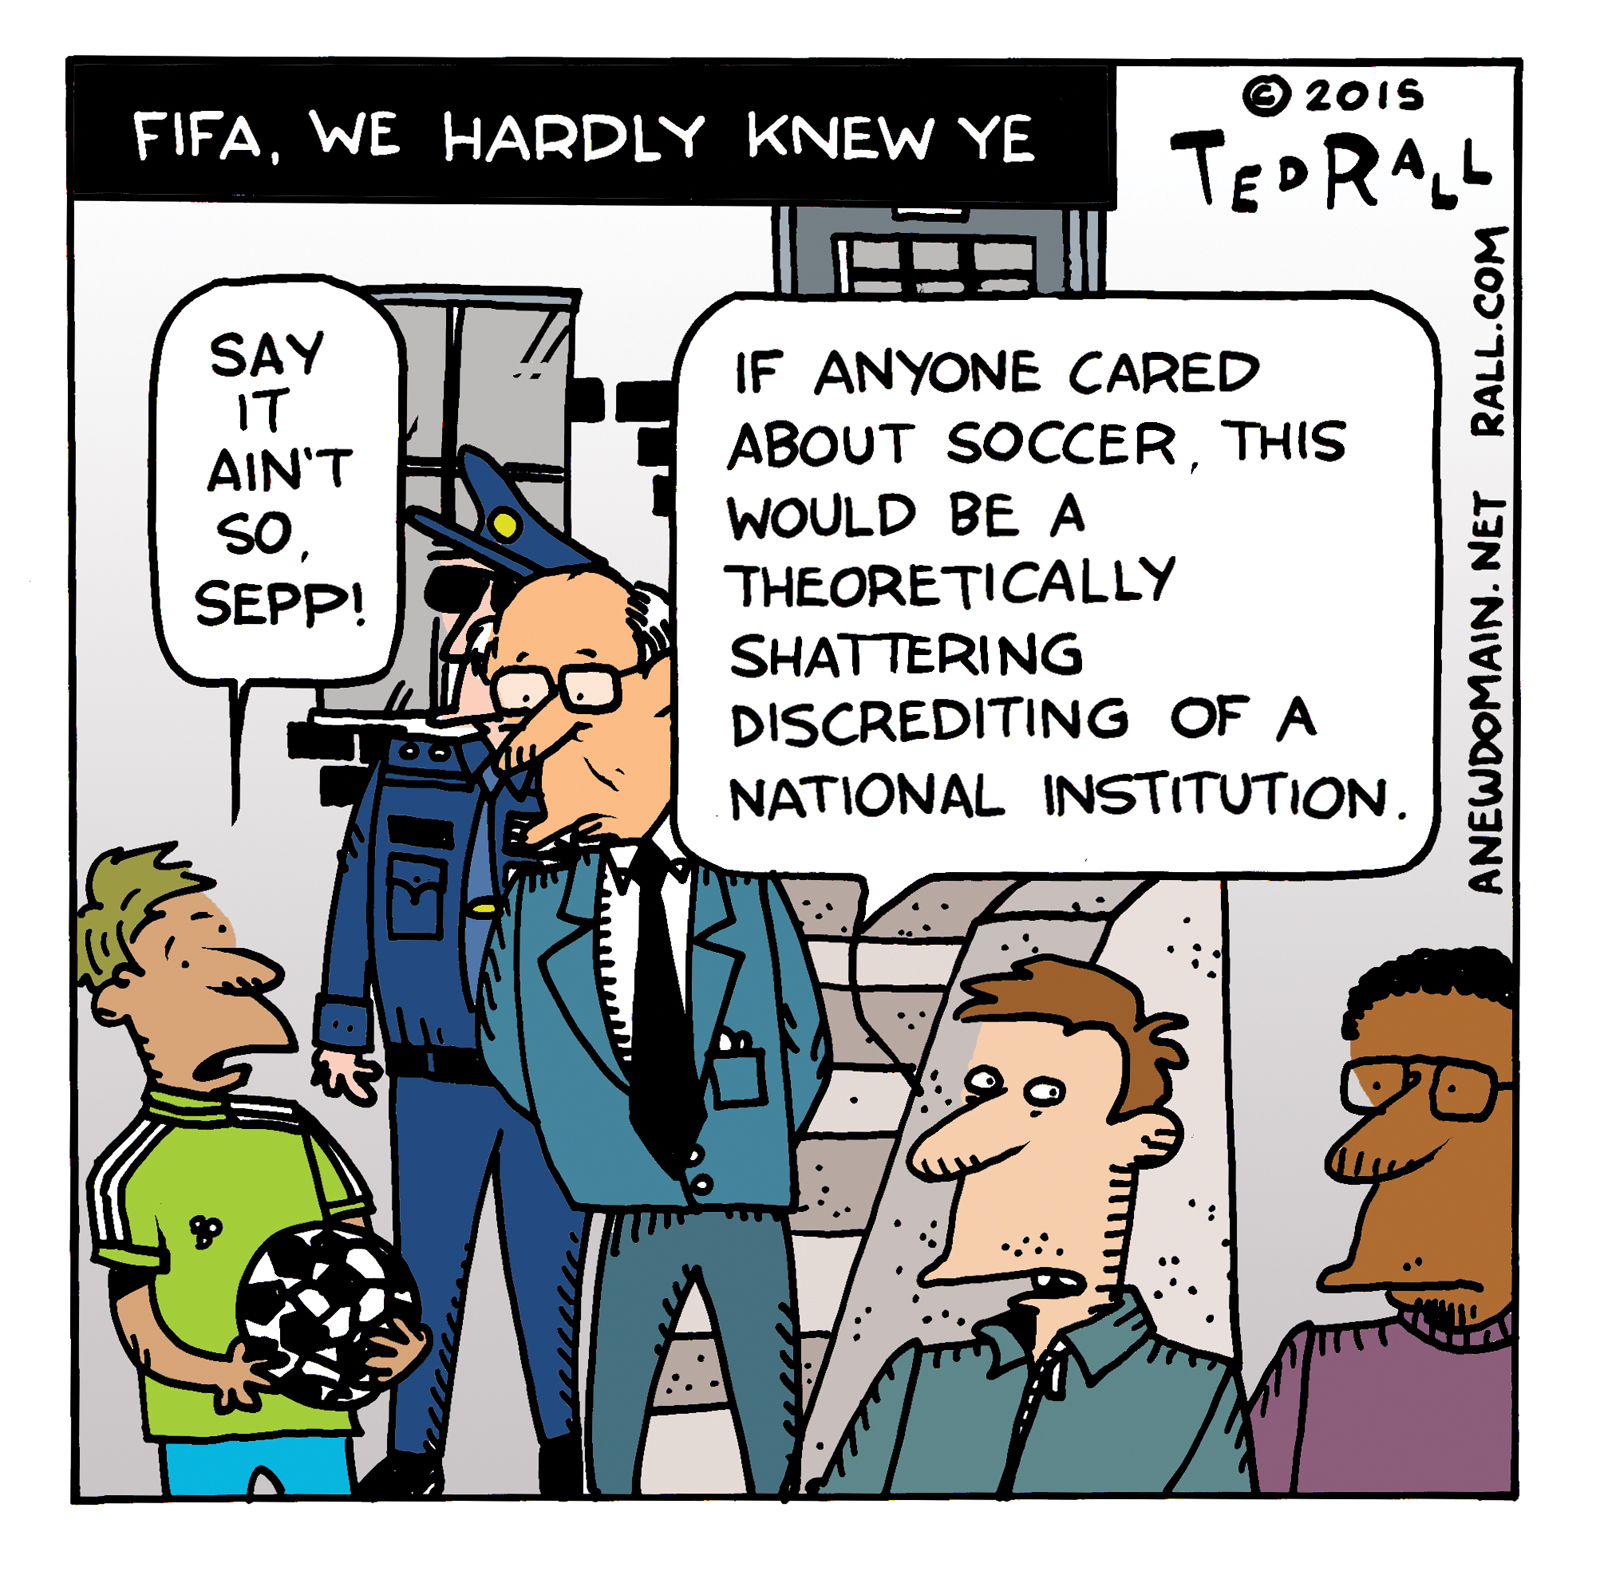 A corruption scandal surrounding FIFA, the governing body of professional international soccer, would devastate our view of sports were the United States the least concerned about soccer.